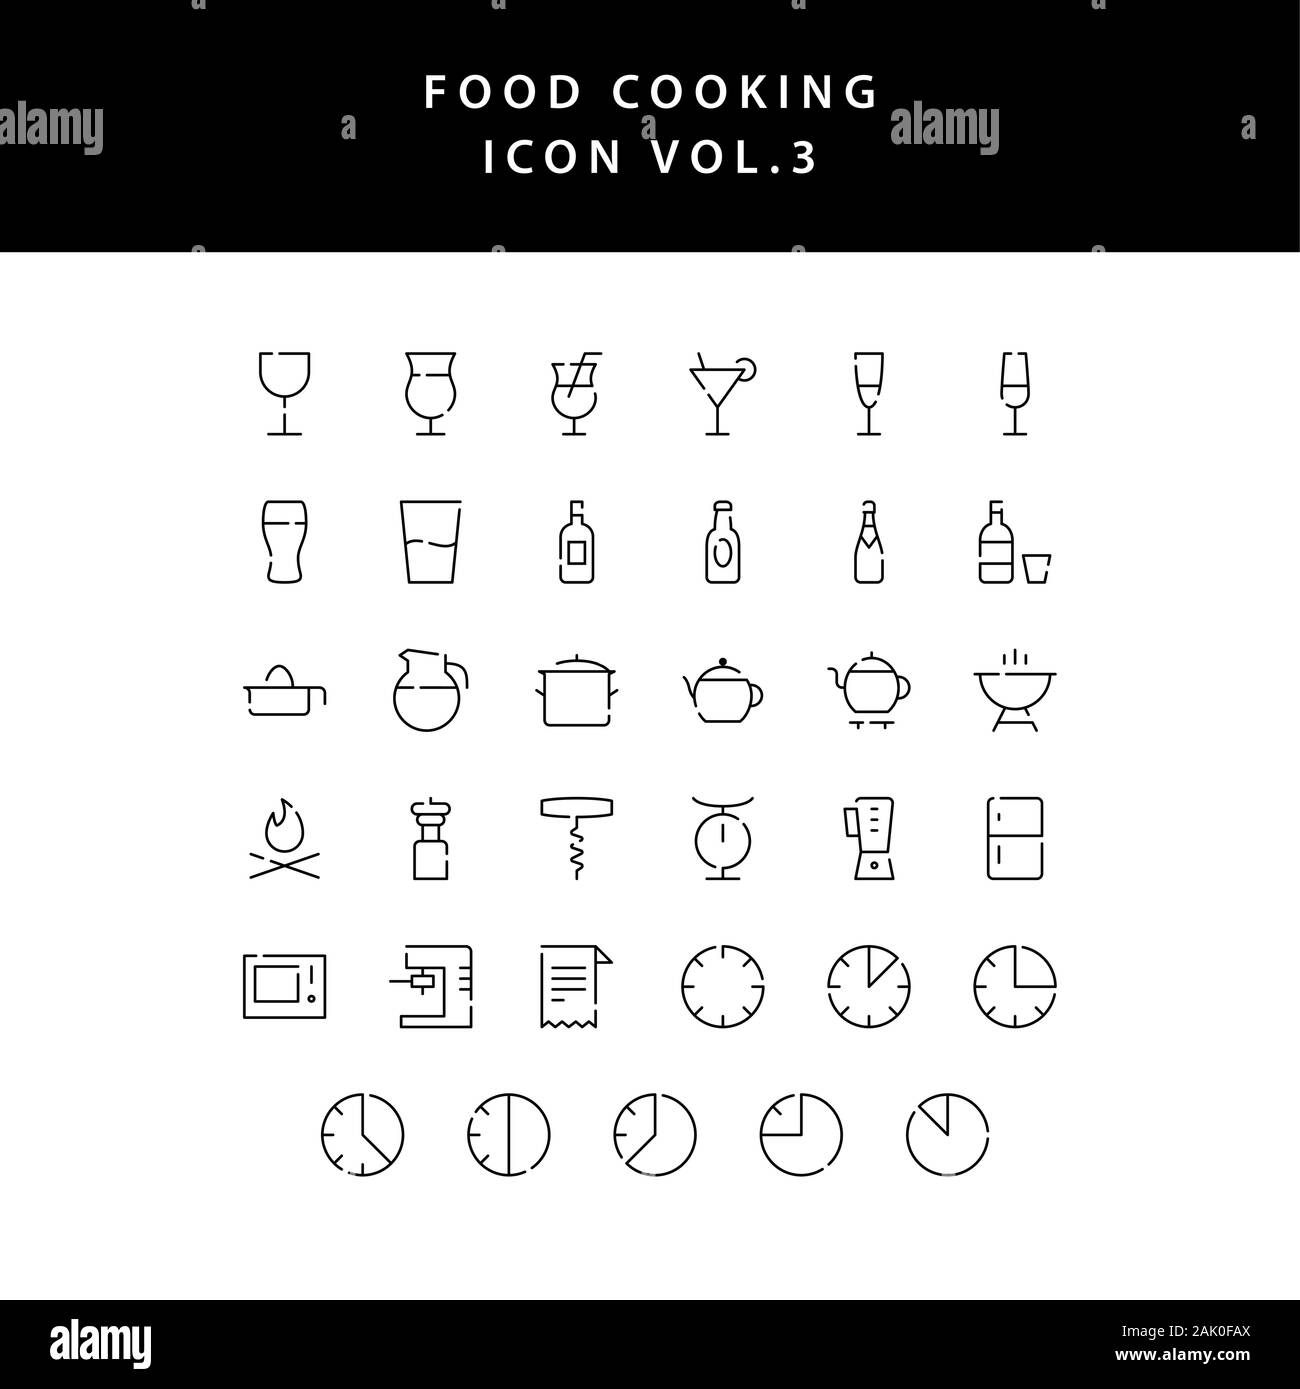 food cooking icon set outline set vol 3 Stock Vector